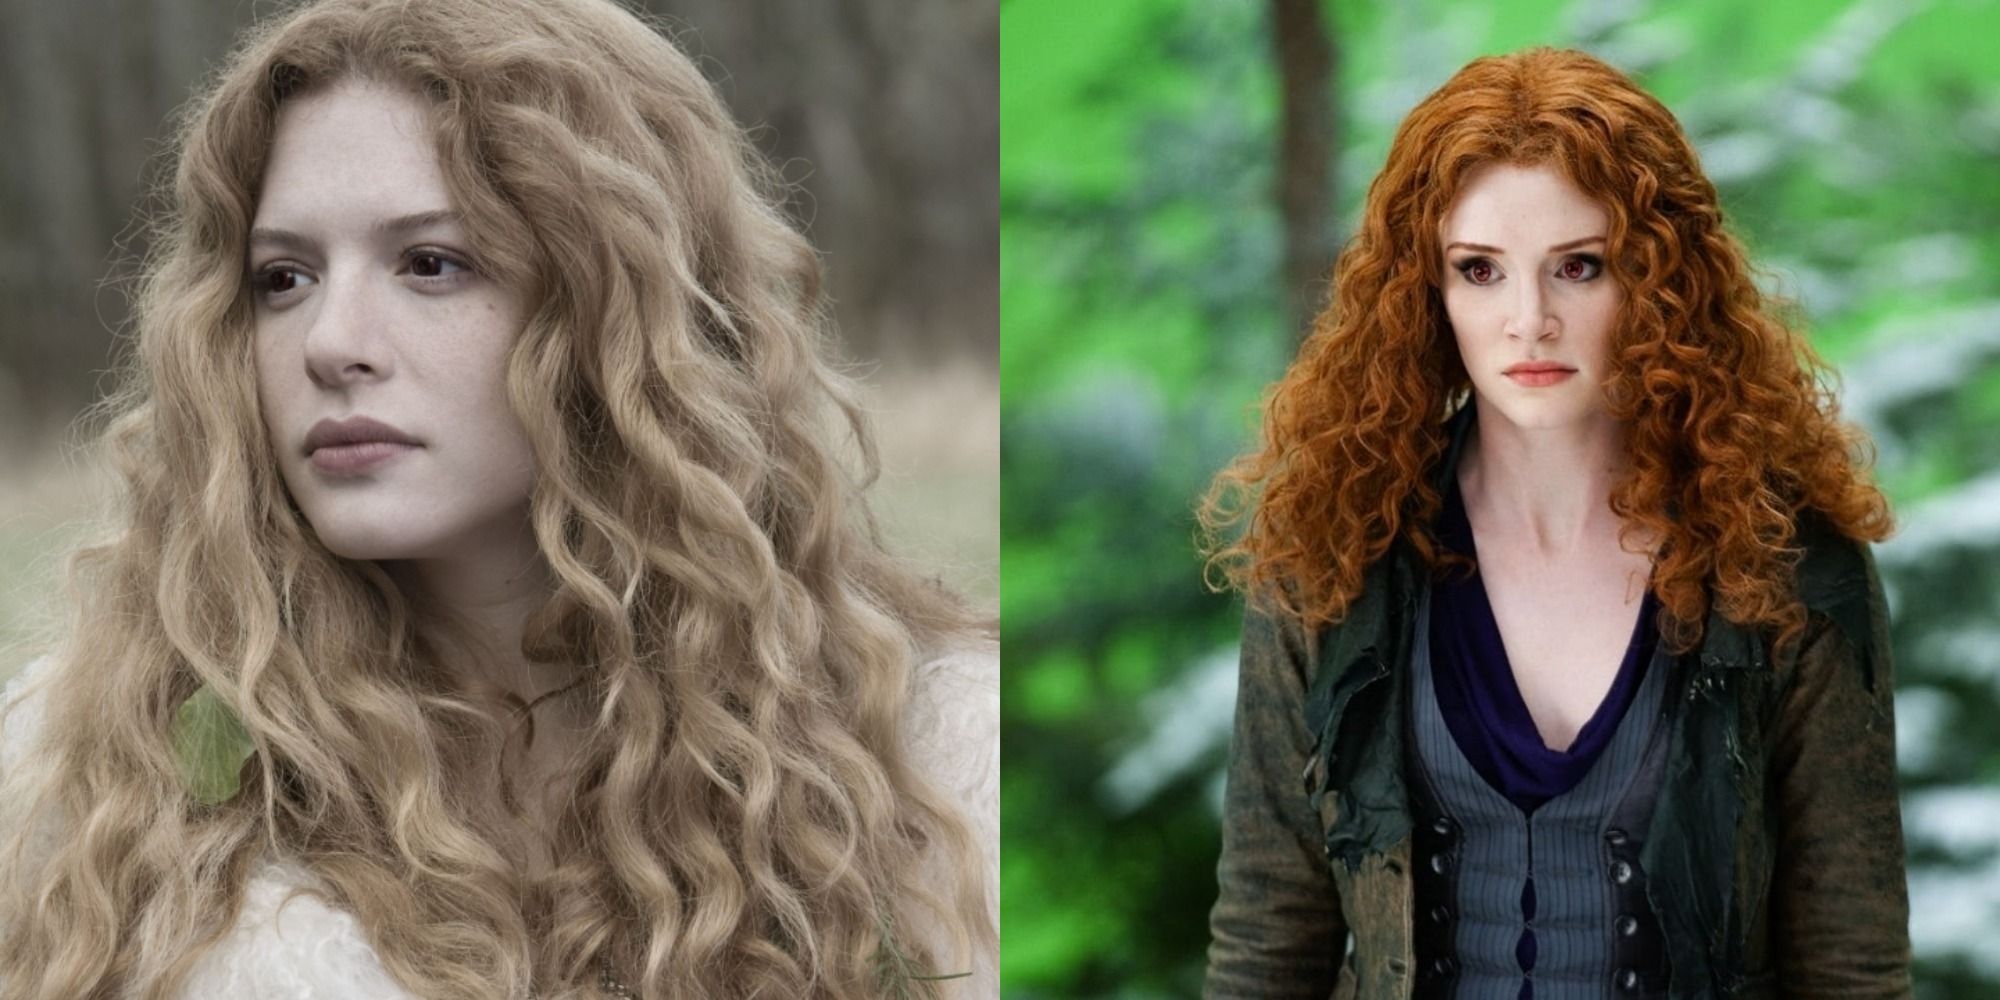 side by side images of Rachelle Lefevre and Bryce Dallas Howard as Victoria in The Twilight Saga